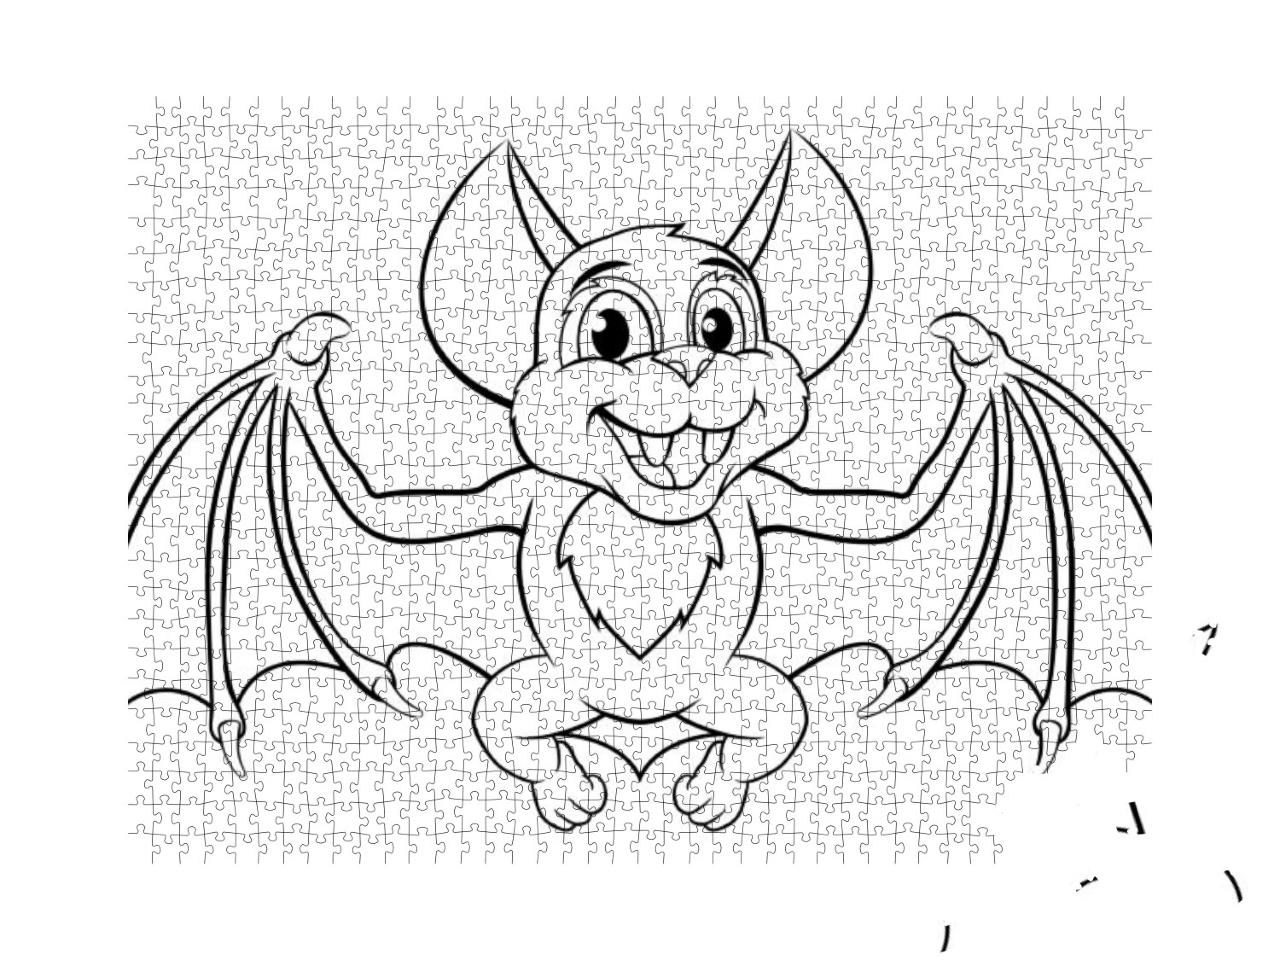 A Cute Halloween Bat Cartoon Character in Black & White O... Jigsaw Puzzle with 1000 pieces